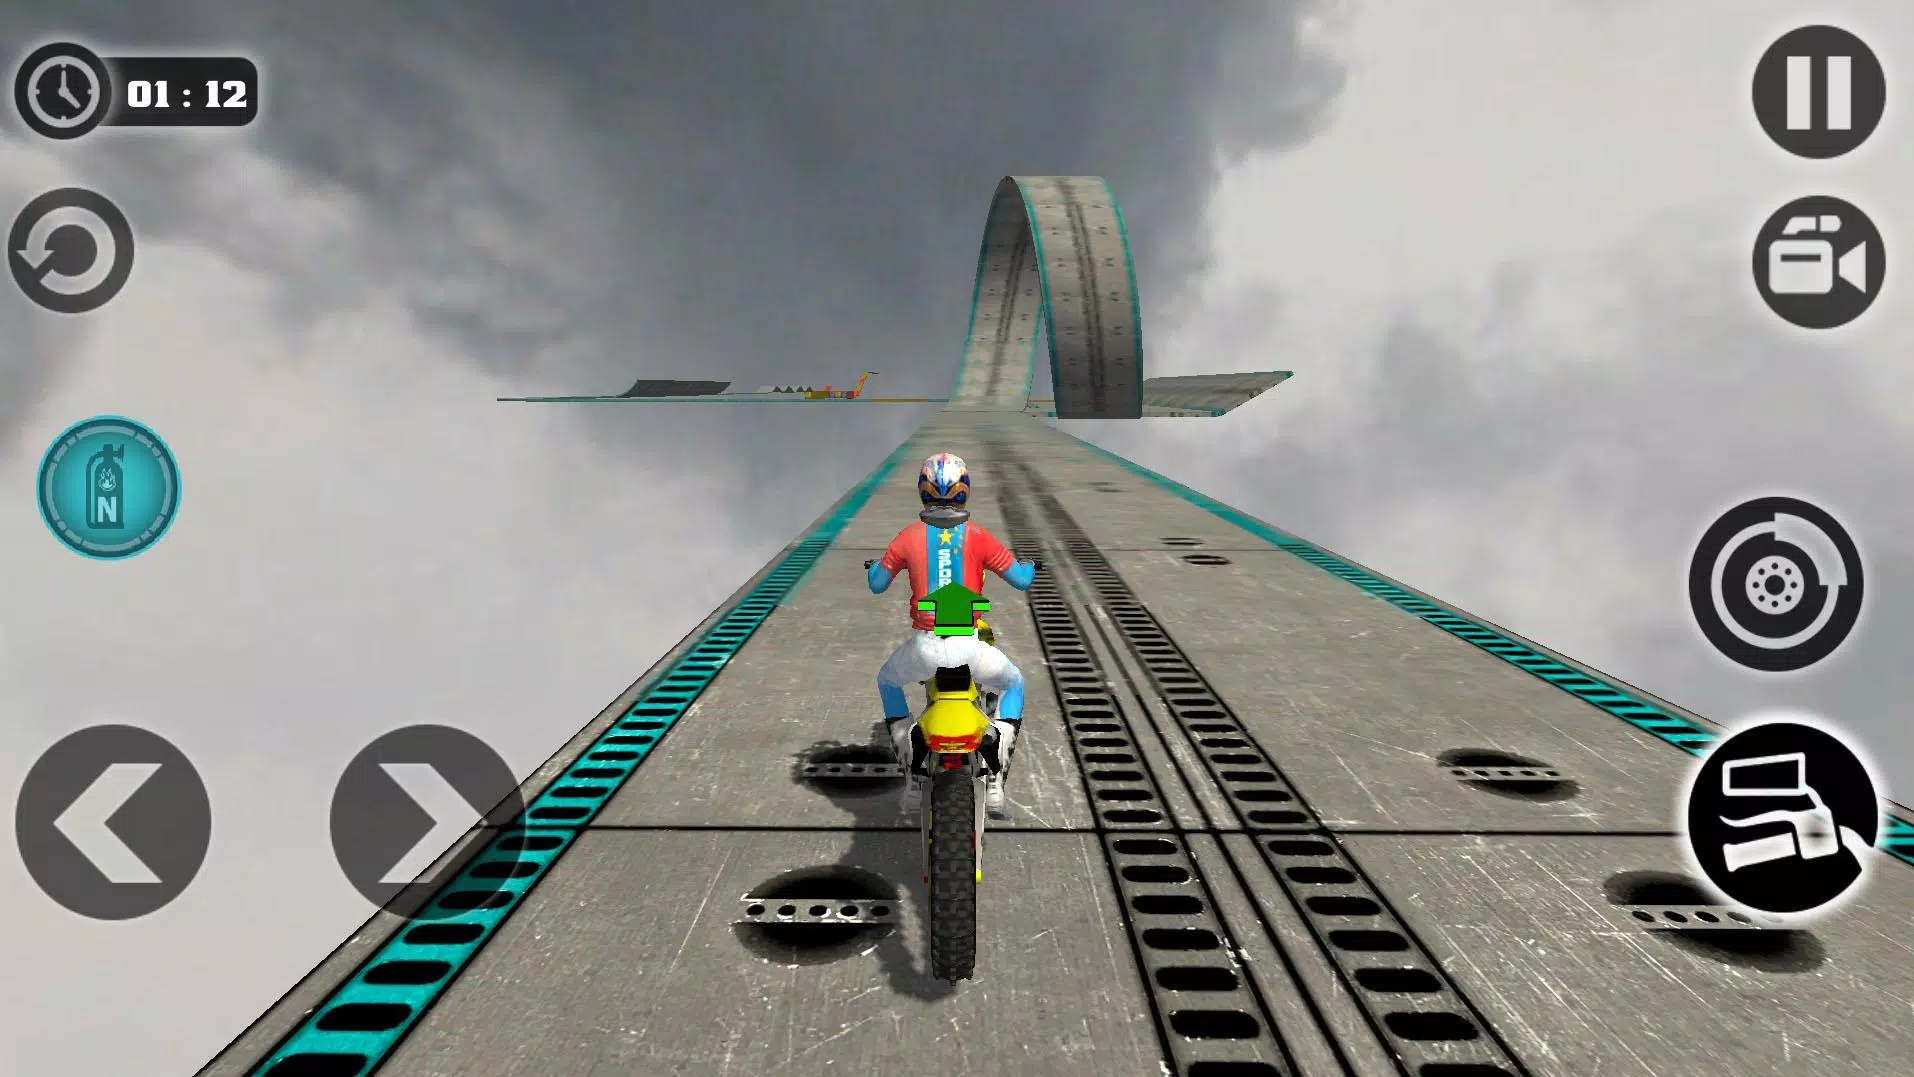 Impossible Motor Bike Tracks New Motor Bike APK for Android Download